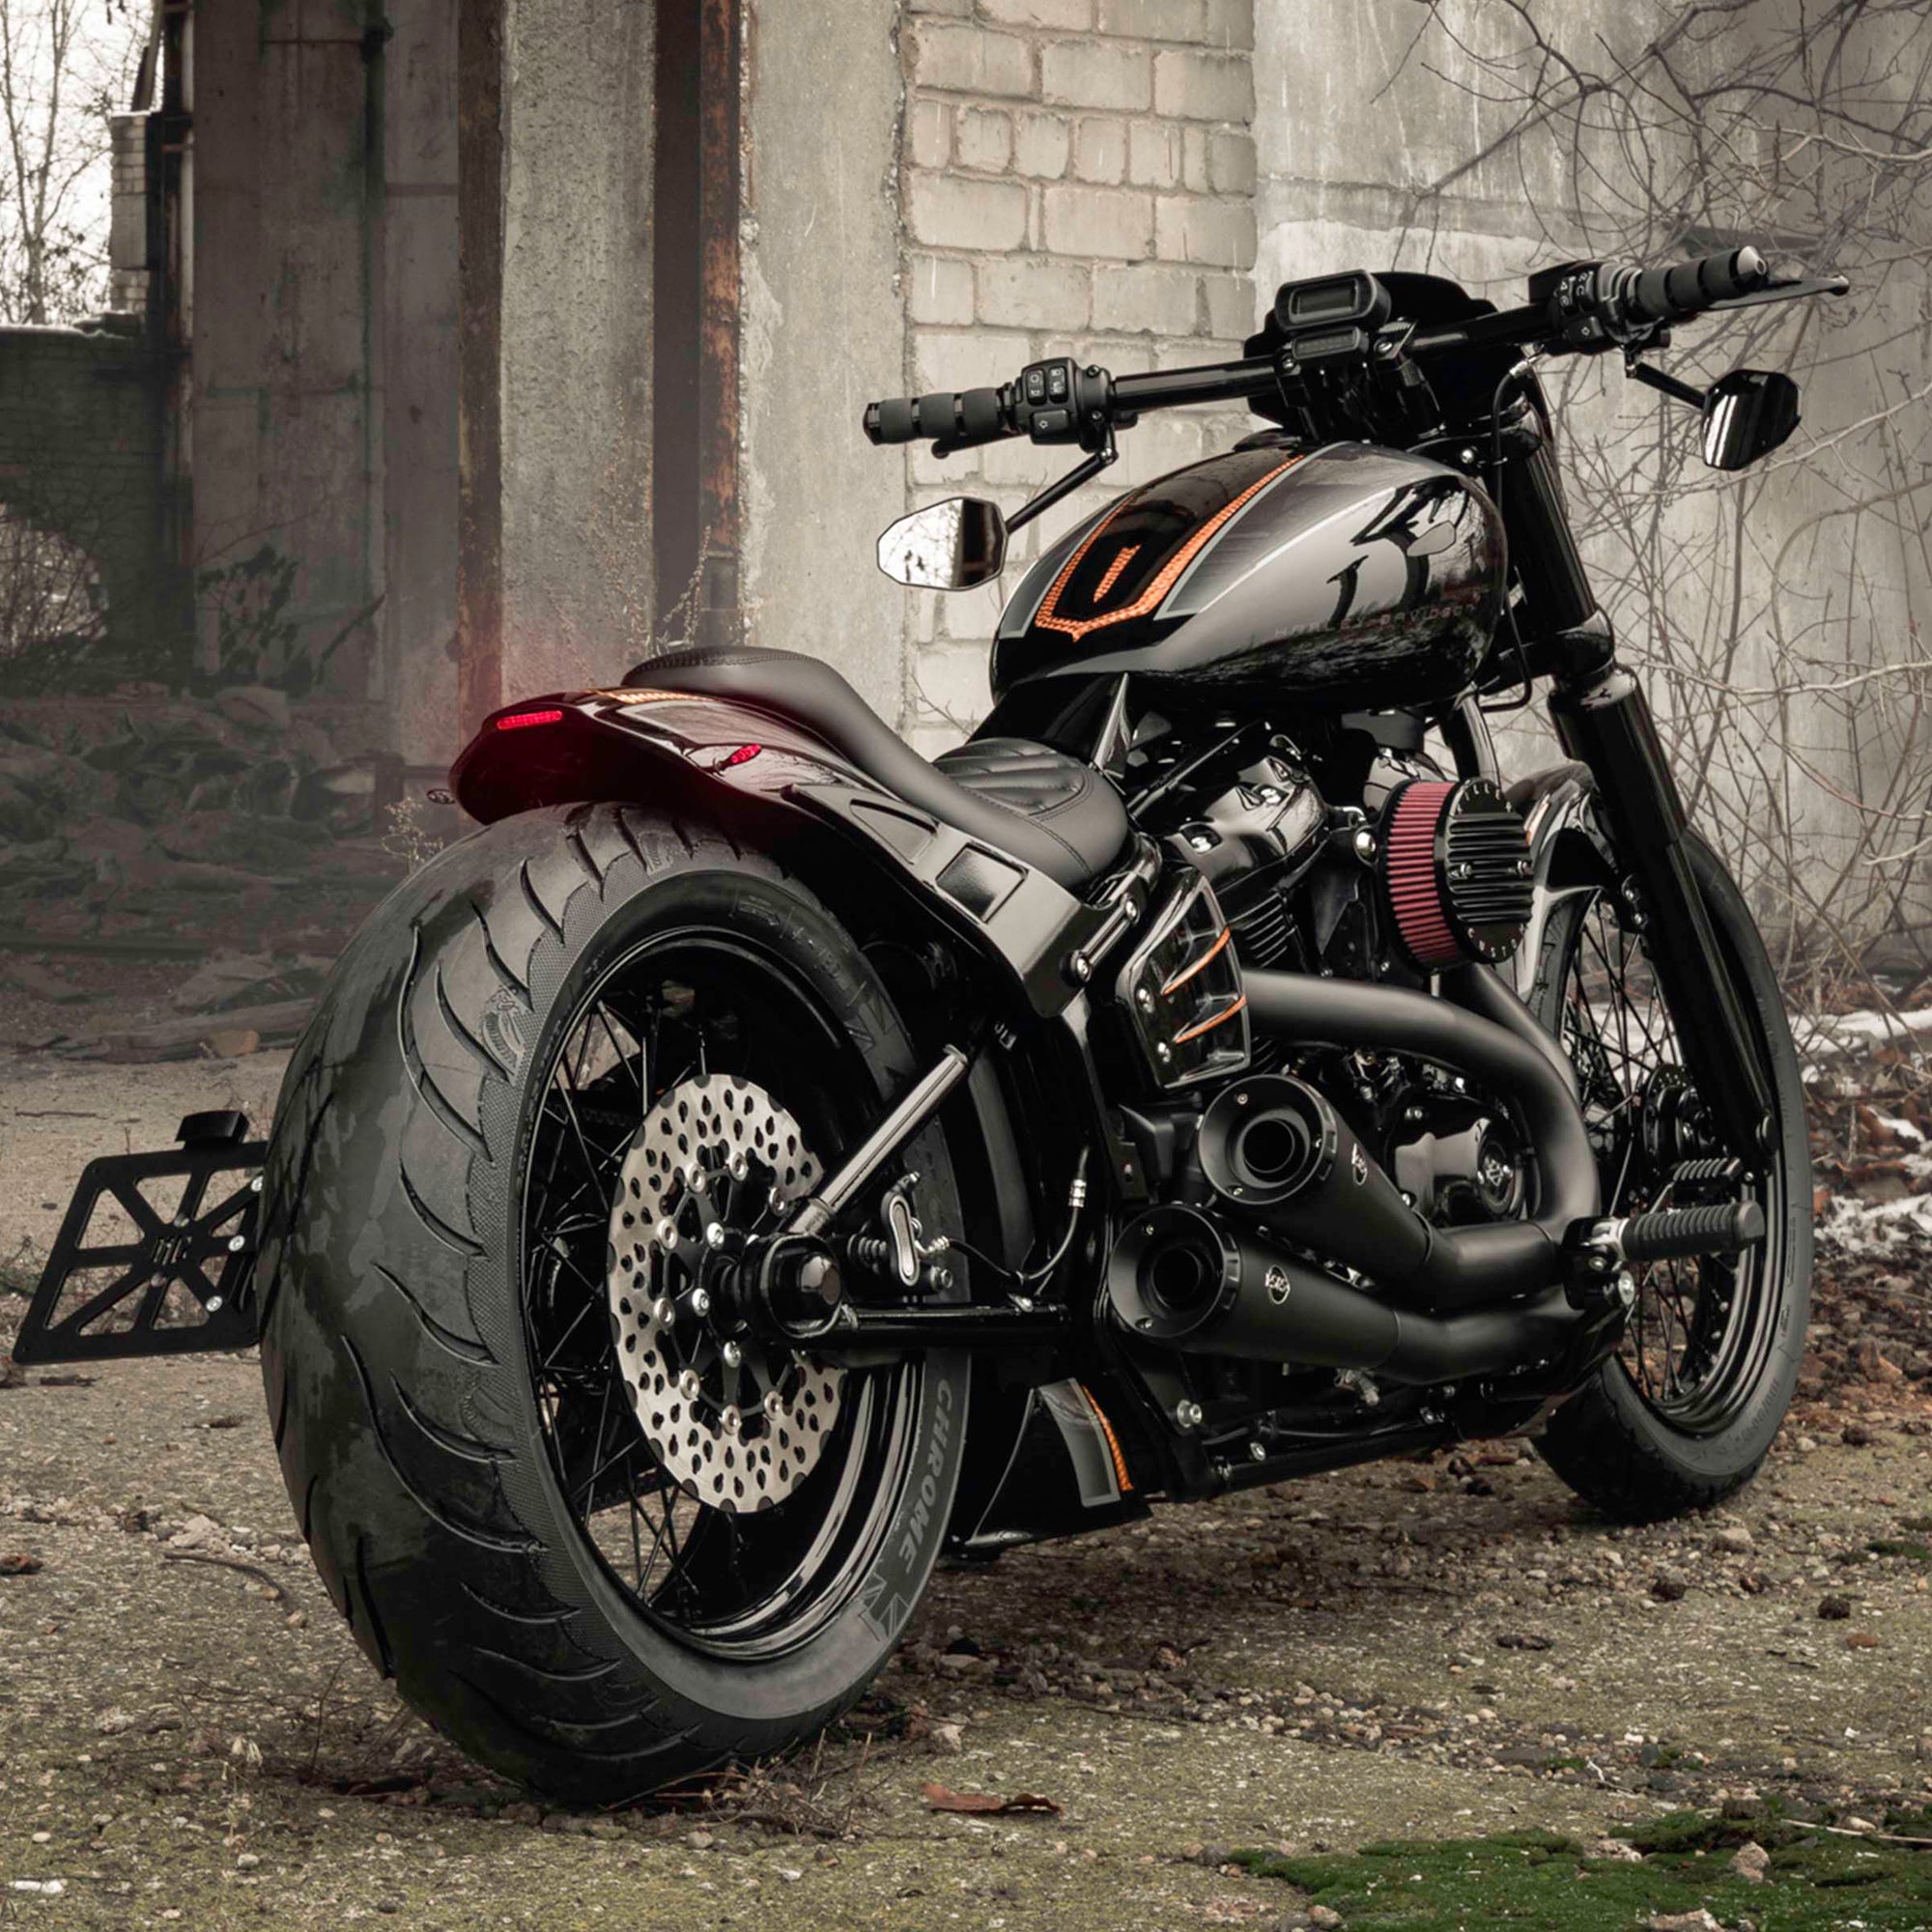 Modified Harley Davidson Street Bob motorcycle with Killer Custom parts from the rear outside in an abandoned environment